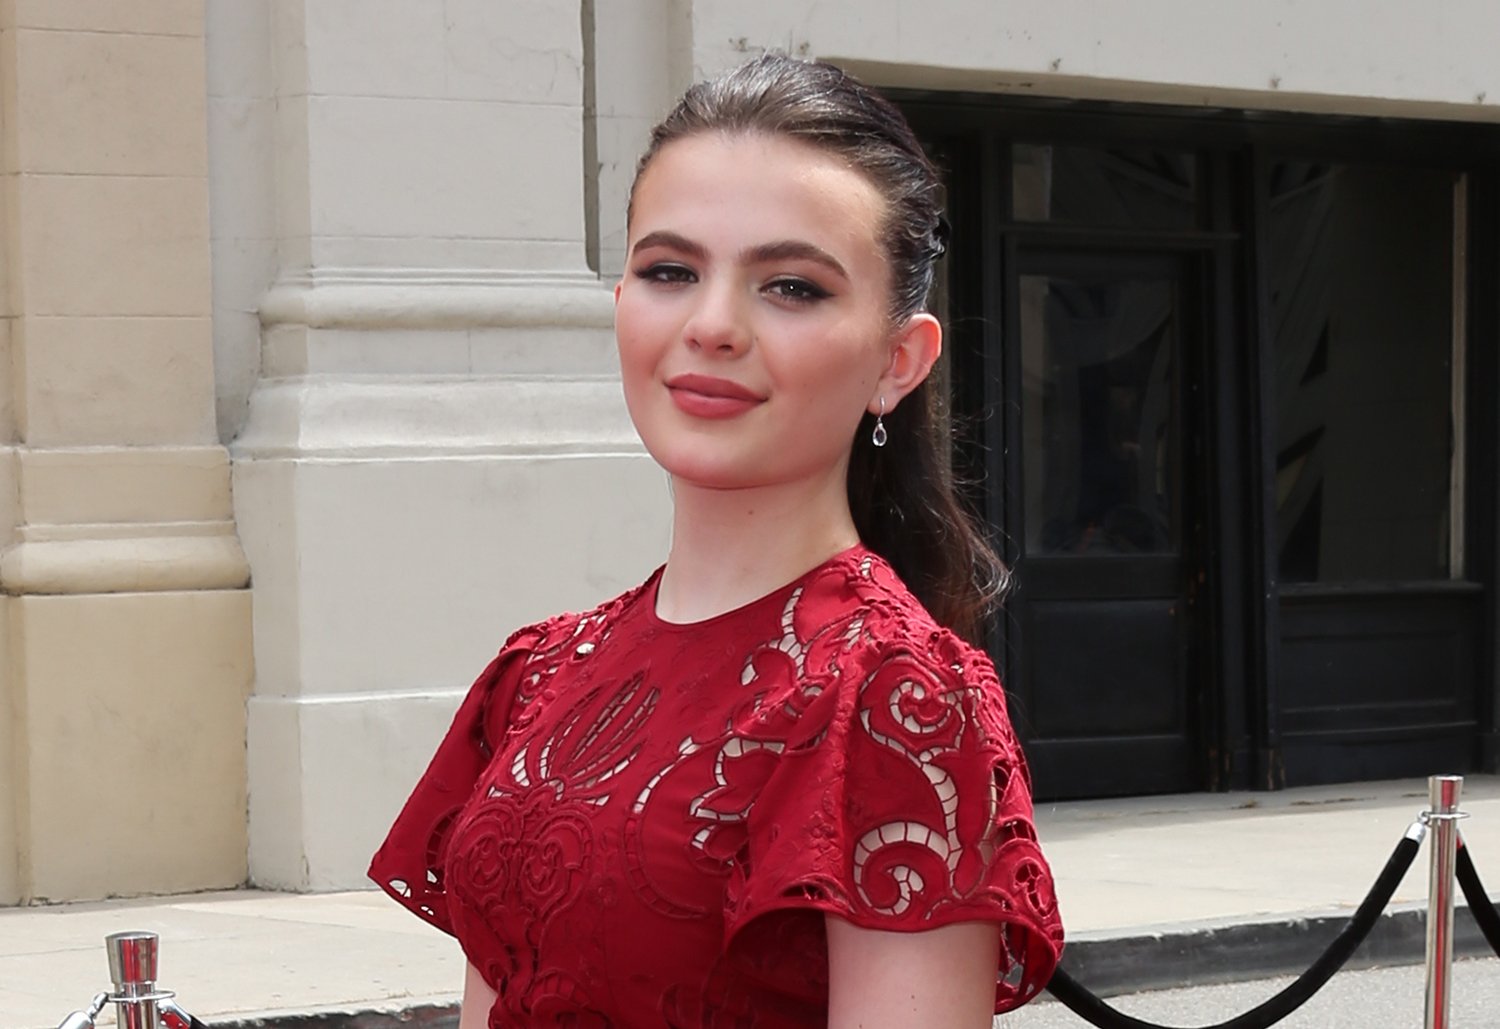 Chiara Aurelia at the 4th Annual Young Entertainer Awards in 2019